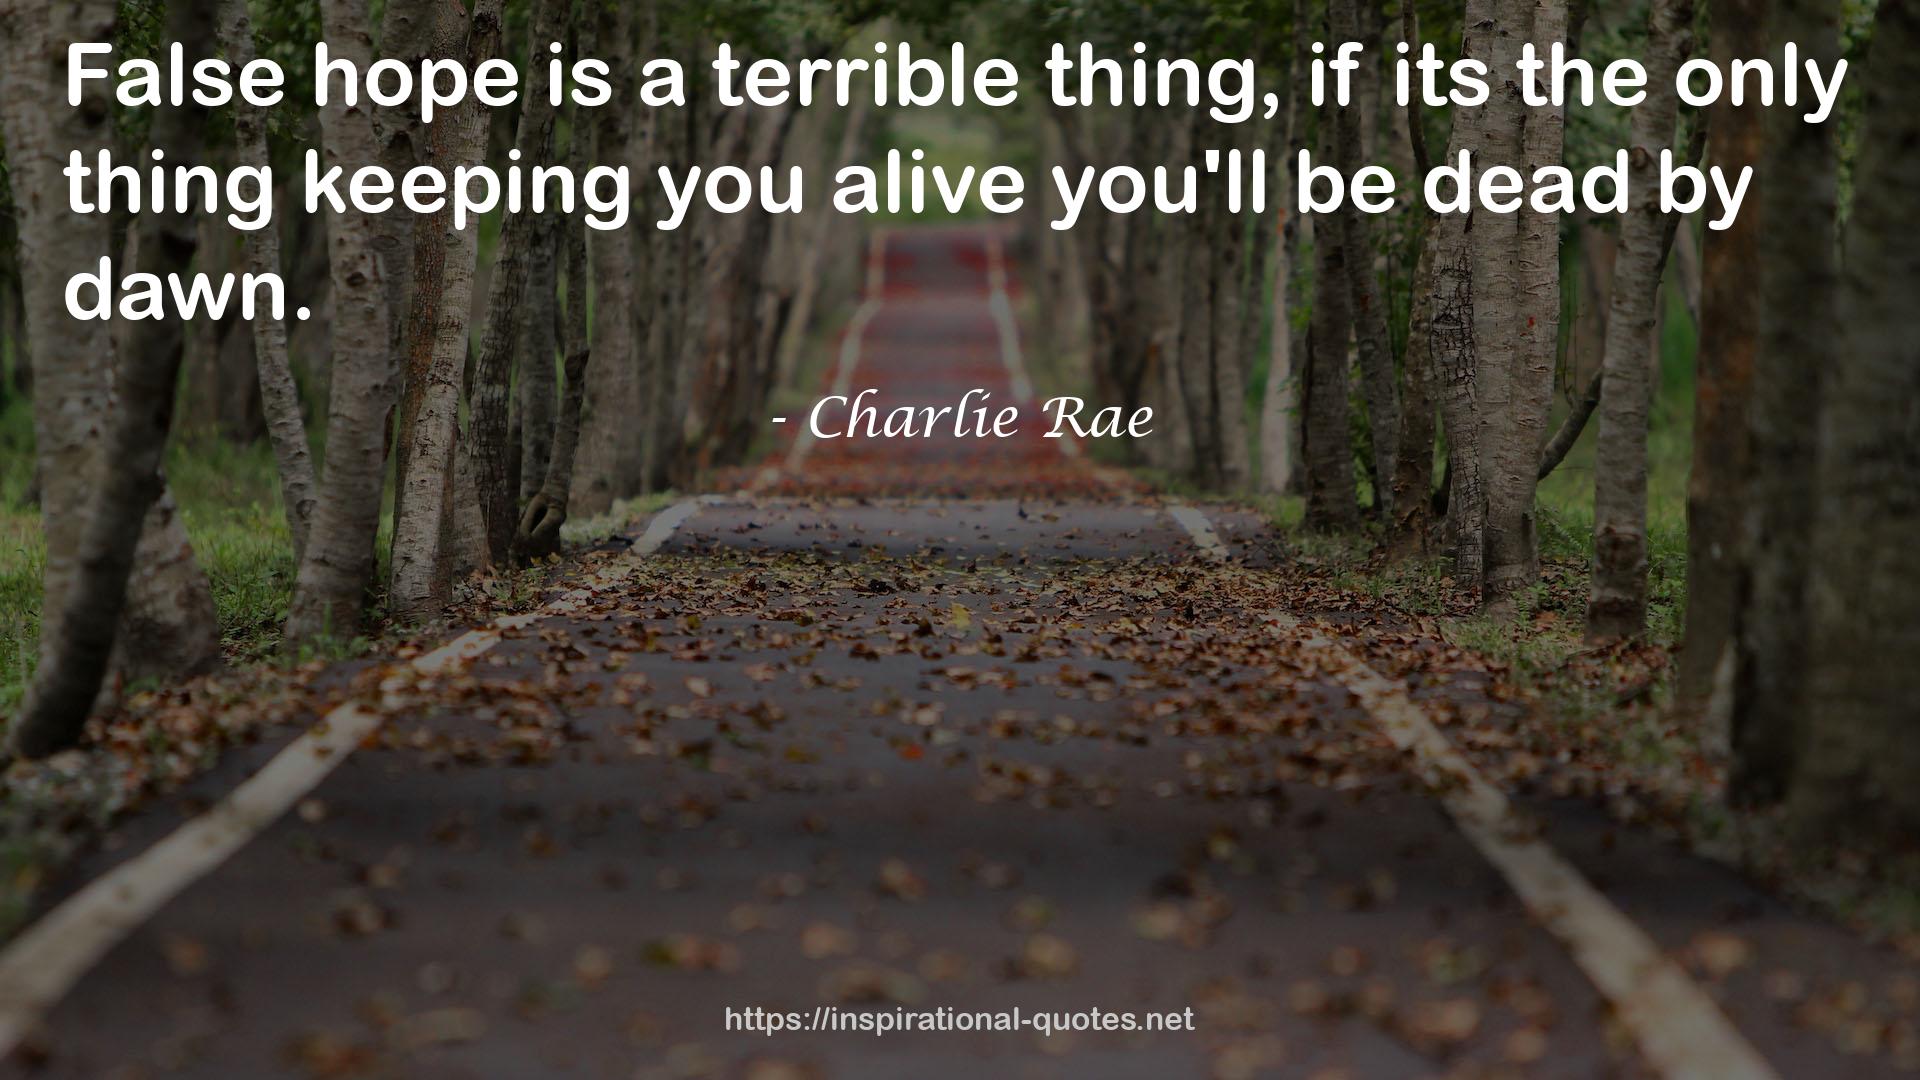 Charlie Rae QUOTES